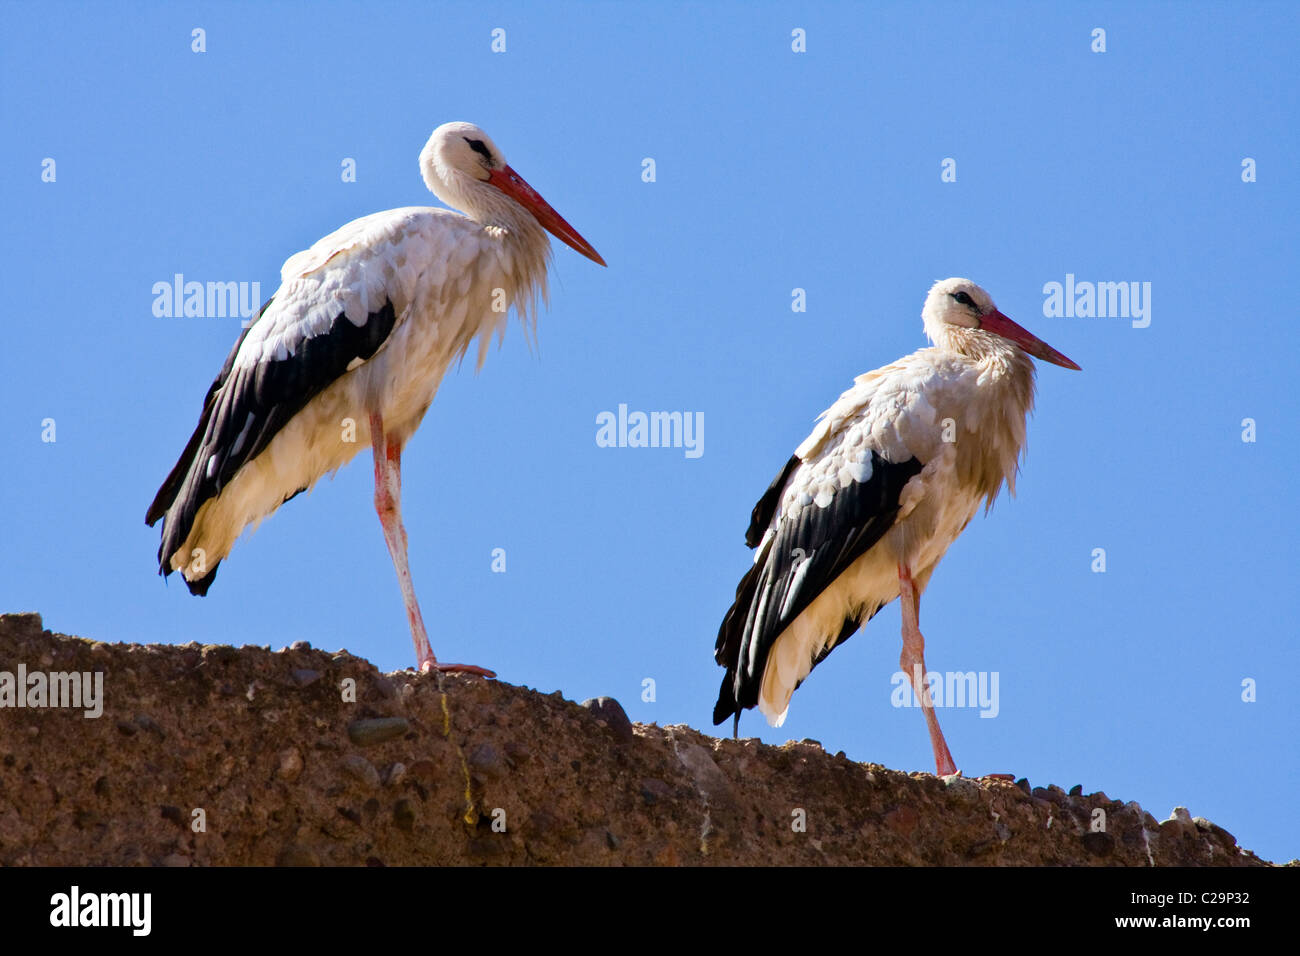 Two storks perched on a wall in Marrakech, Morocco, North Africa Stock Photo